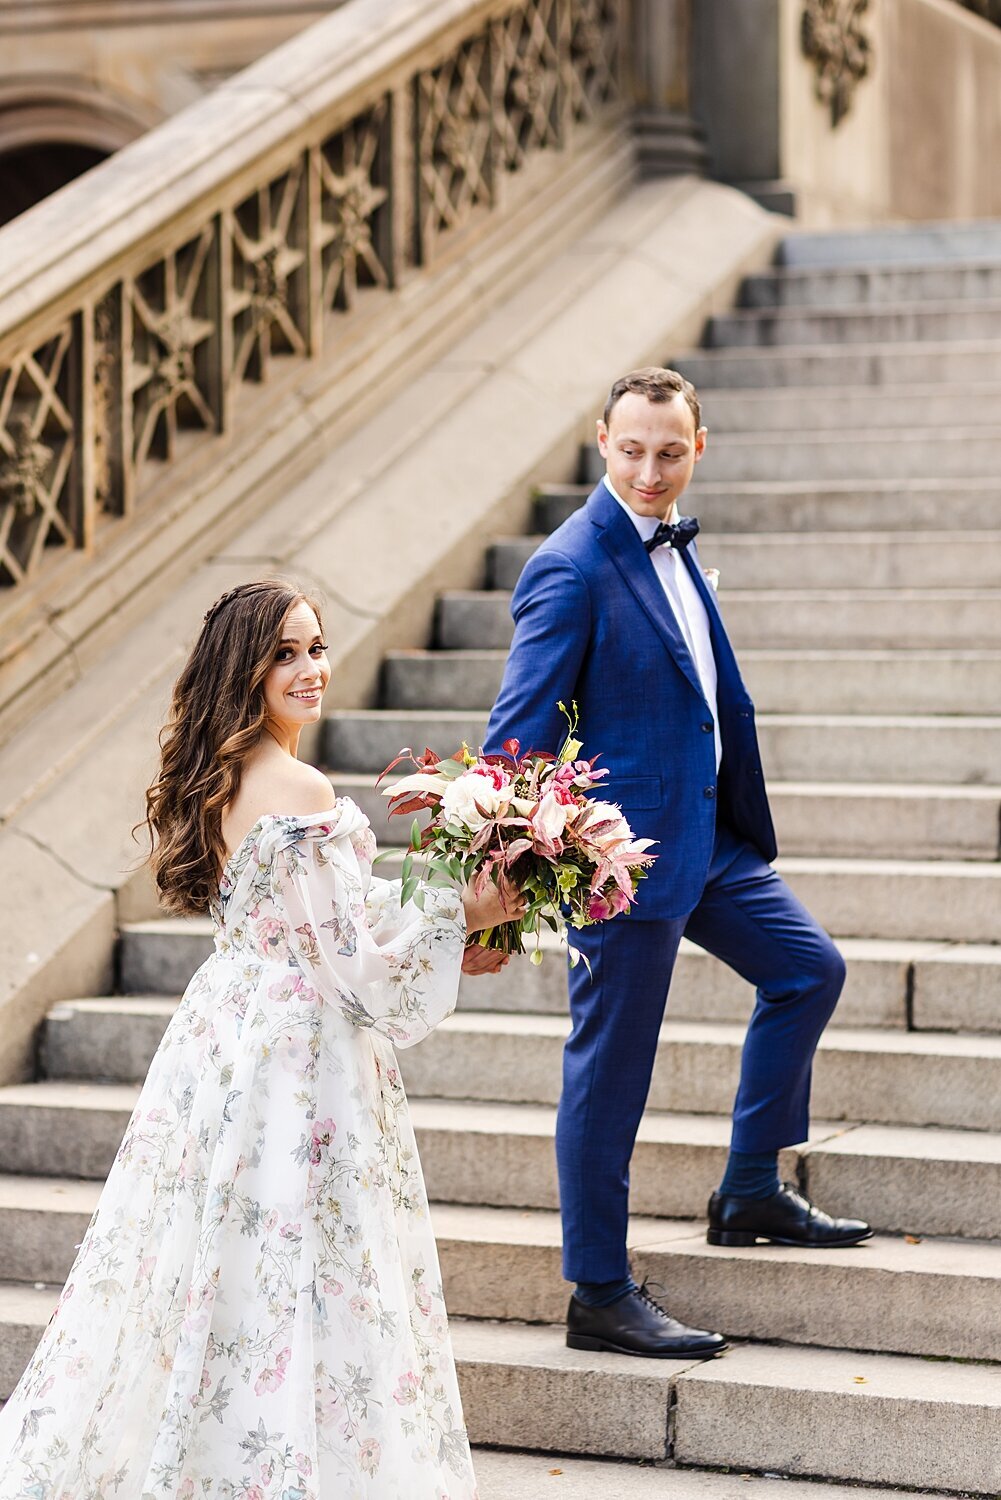 Groom holds bride's hand as they walk up the stairs in Central Park in New York City, New York